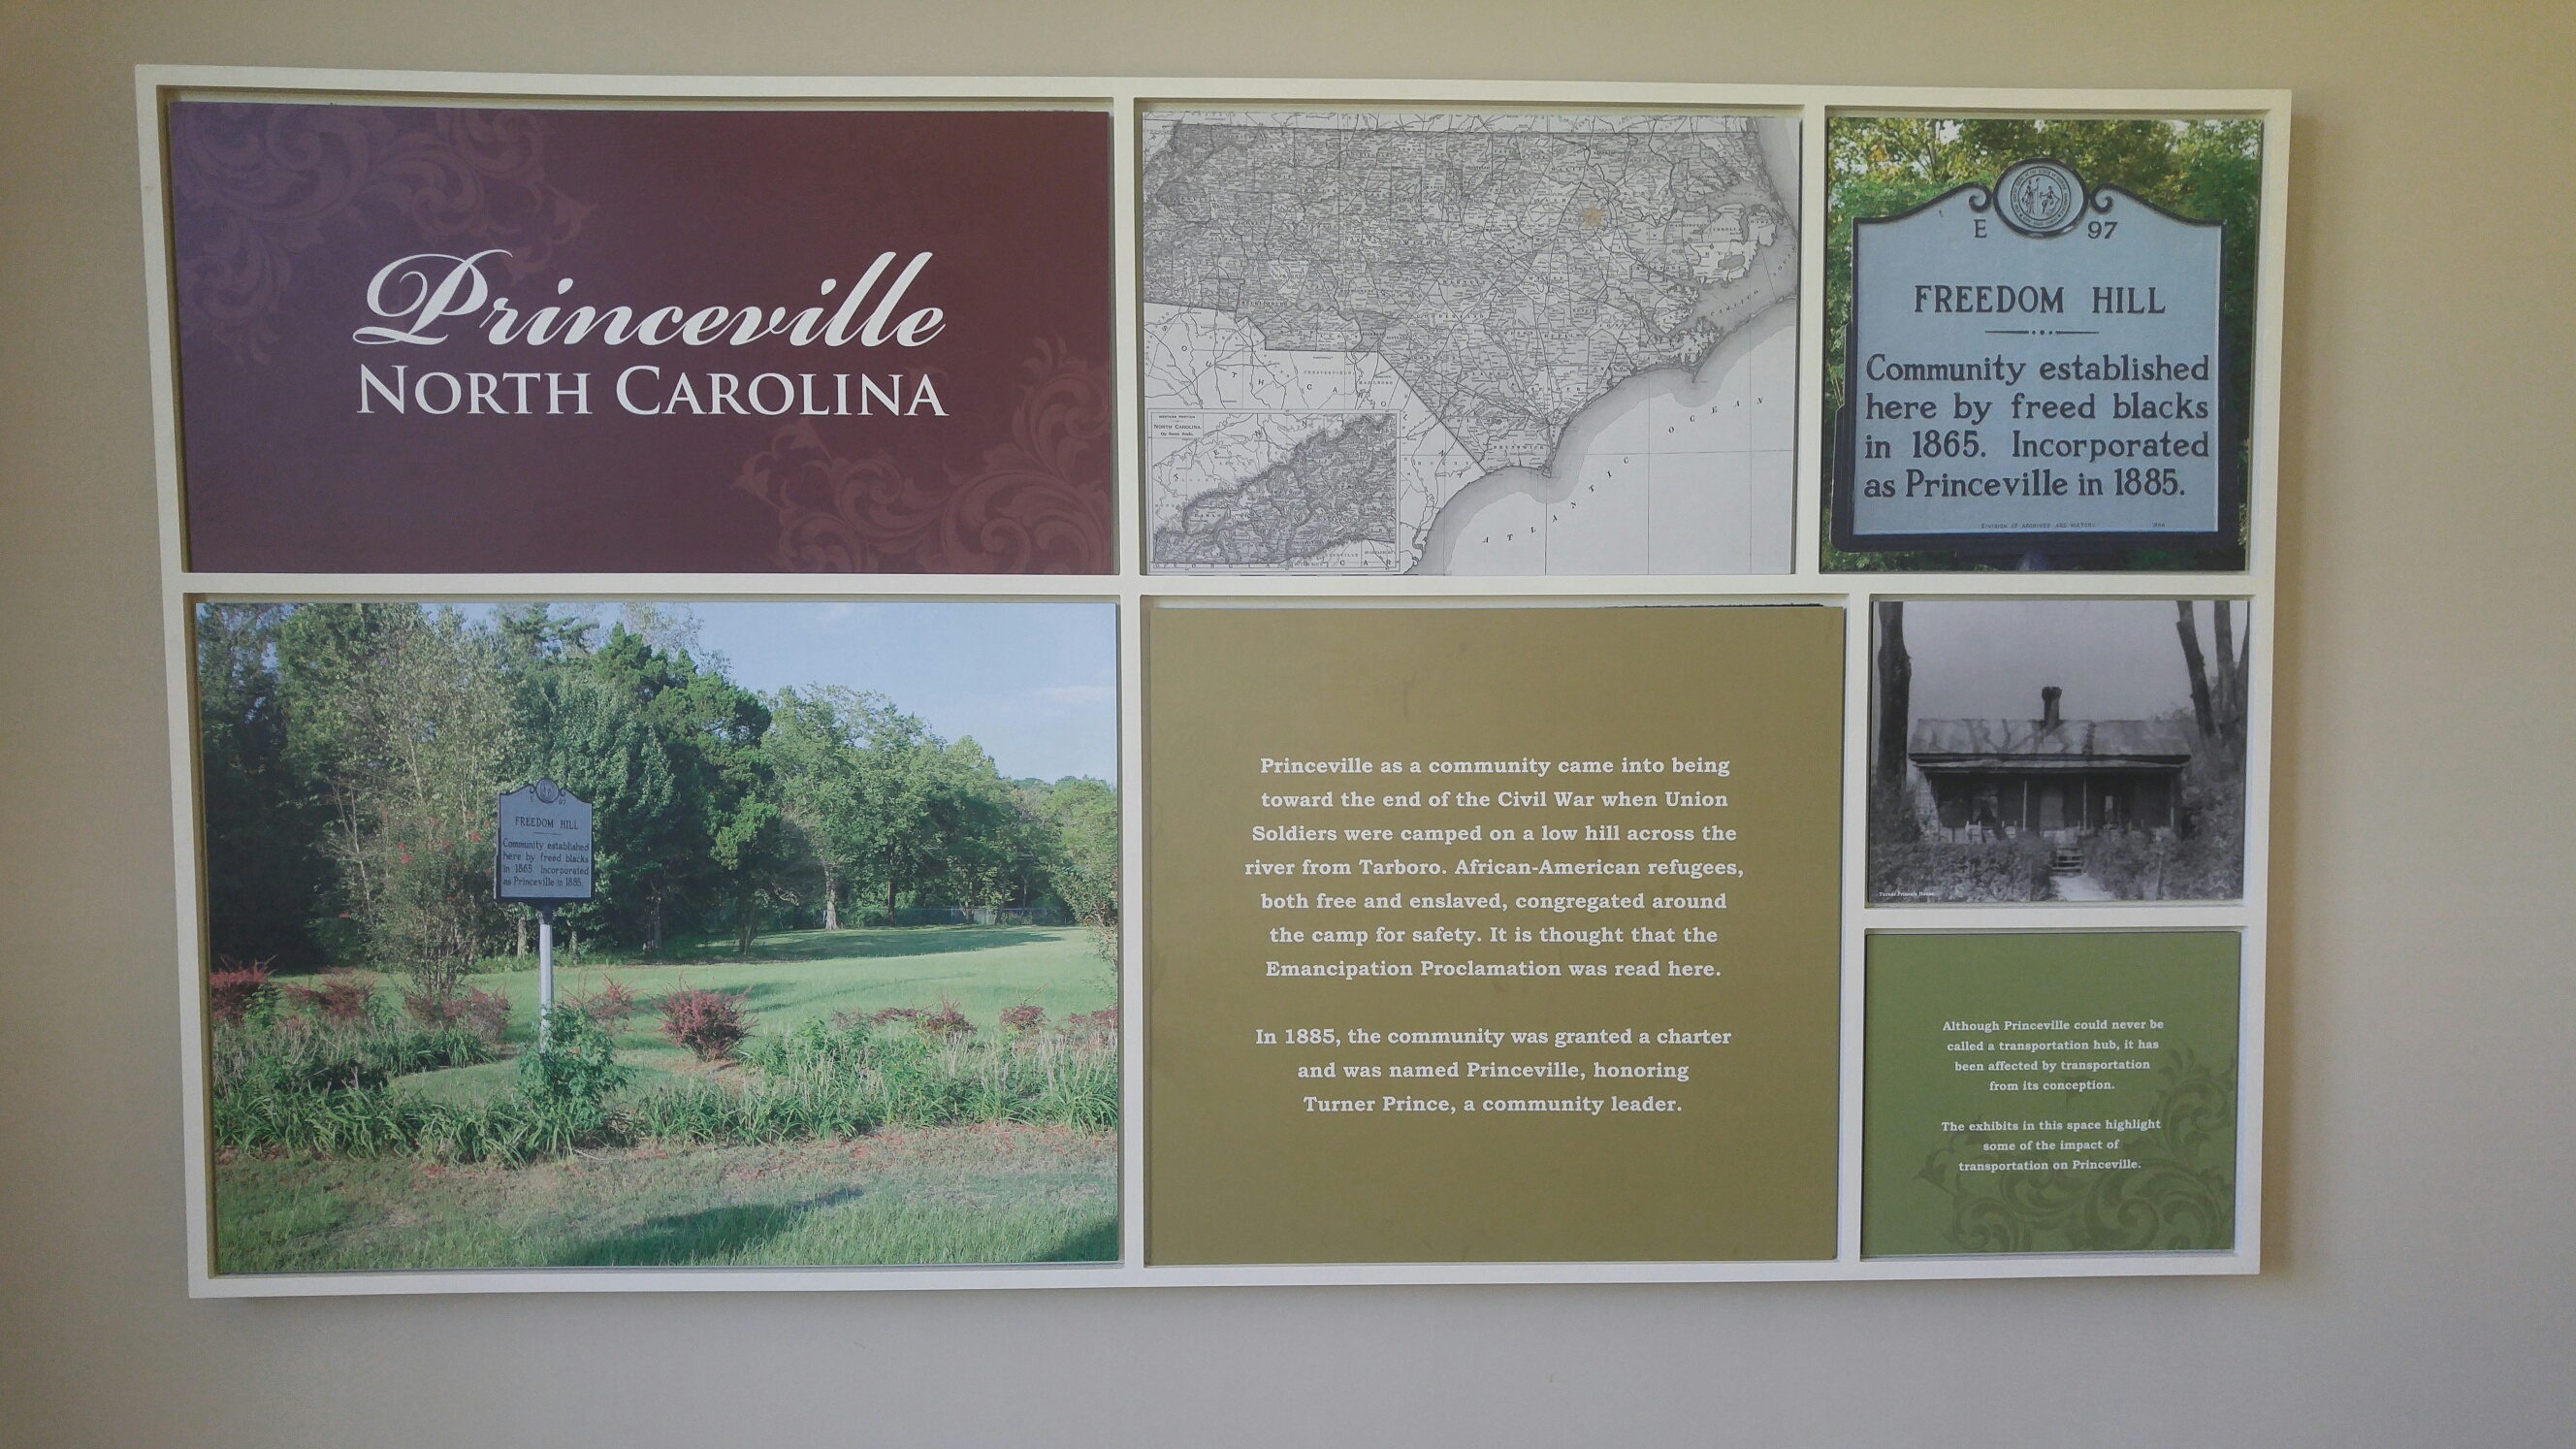 Princeville as a community came into being toward the end of the Civil War when former slaves moved to an area where the union army was camped.  (photo by: Kayla Greene)